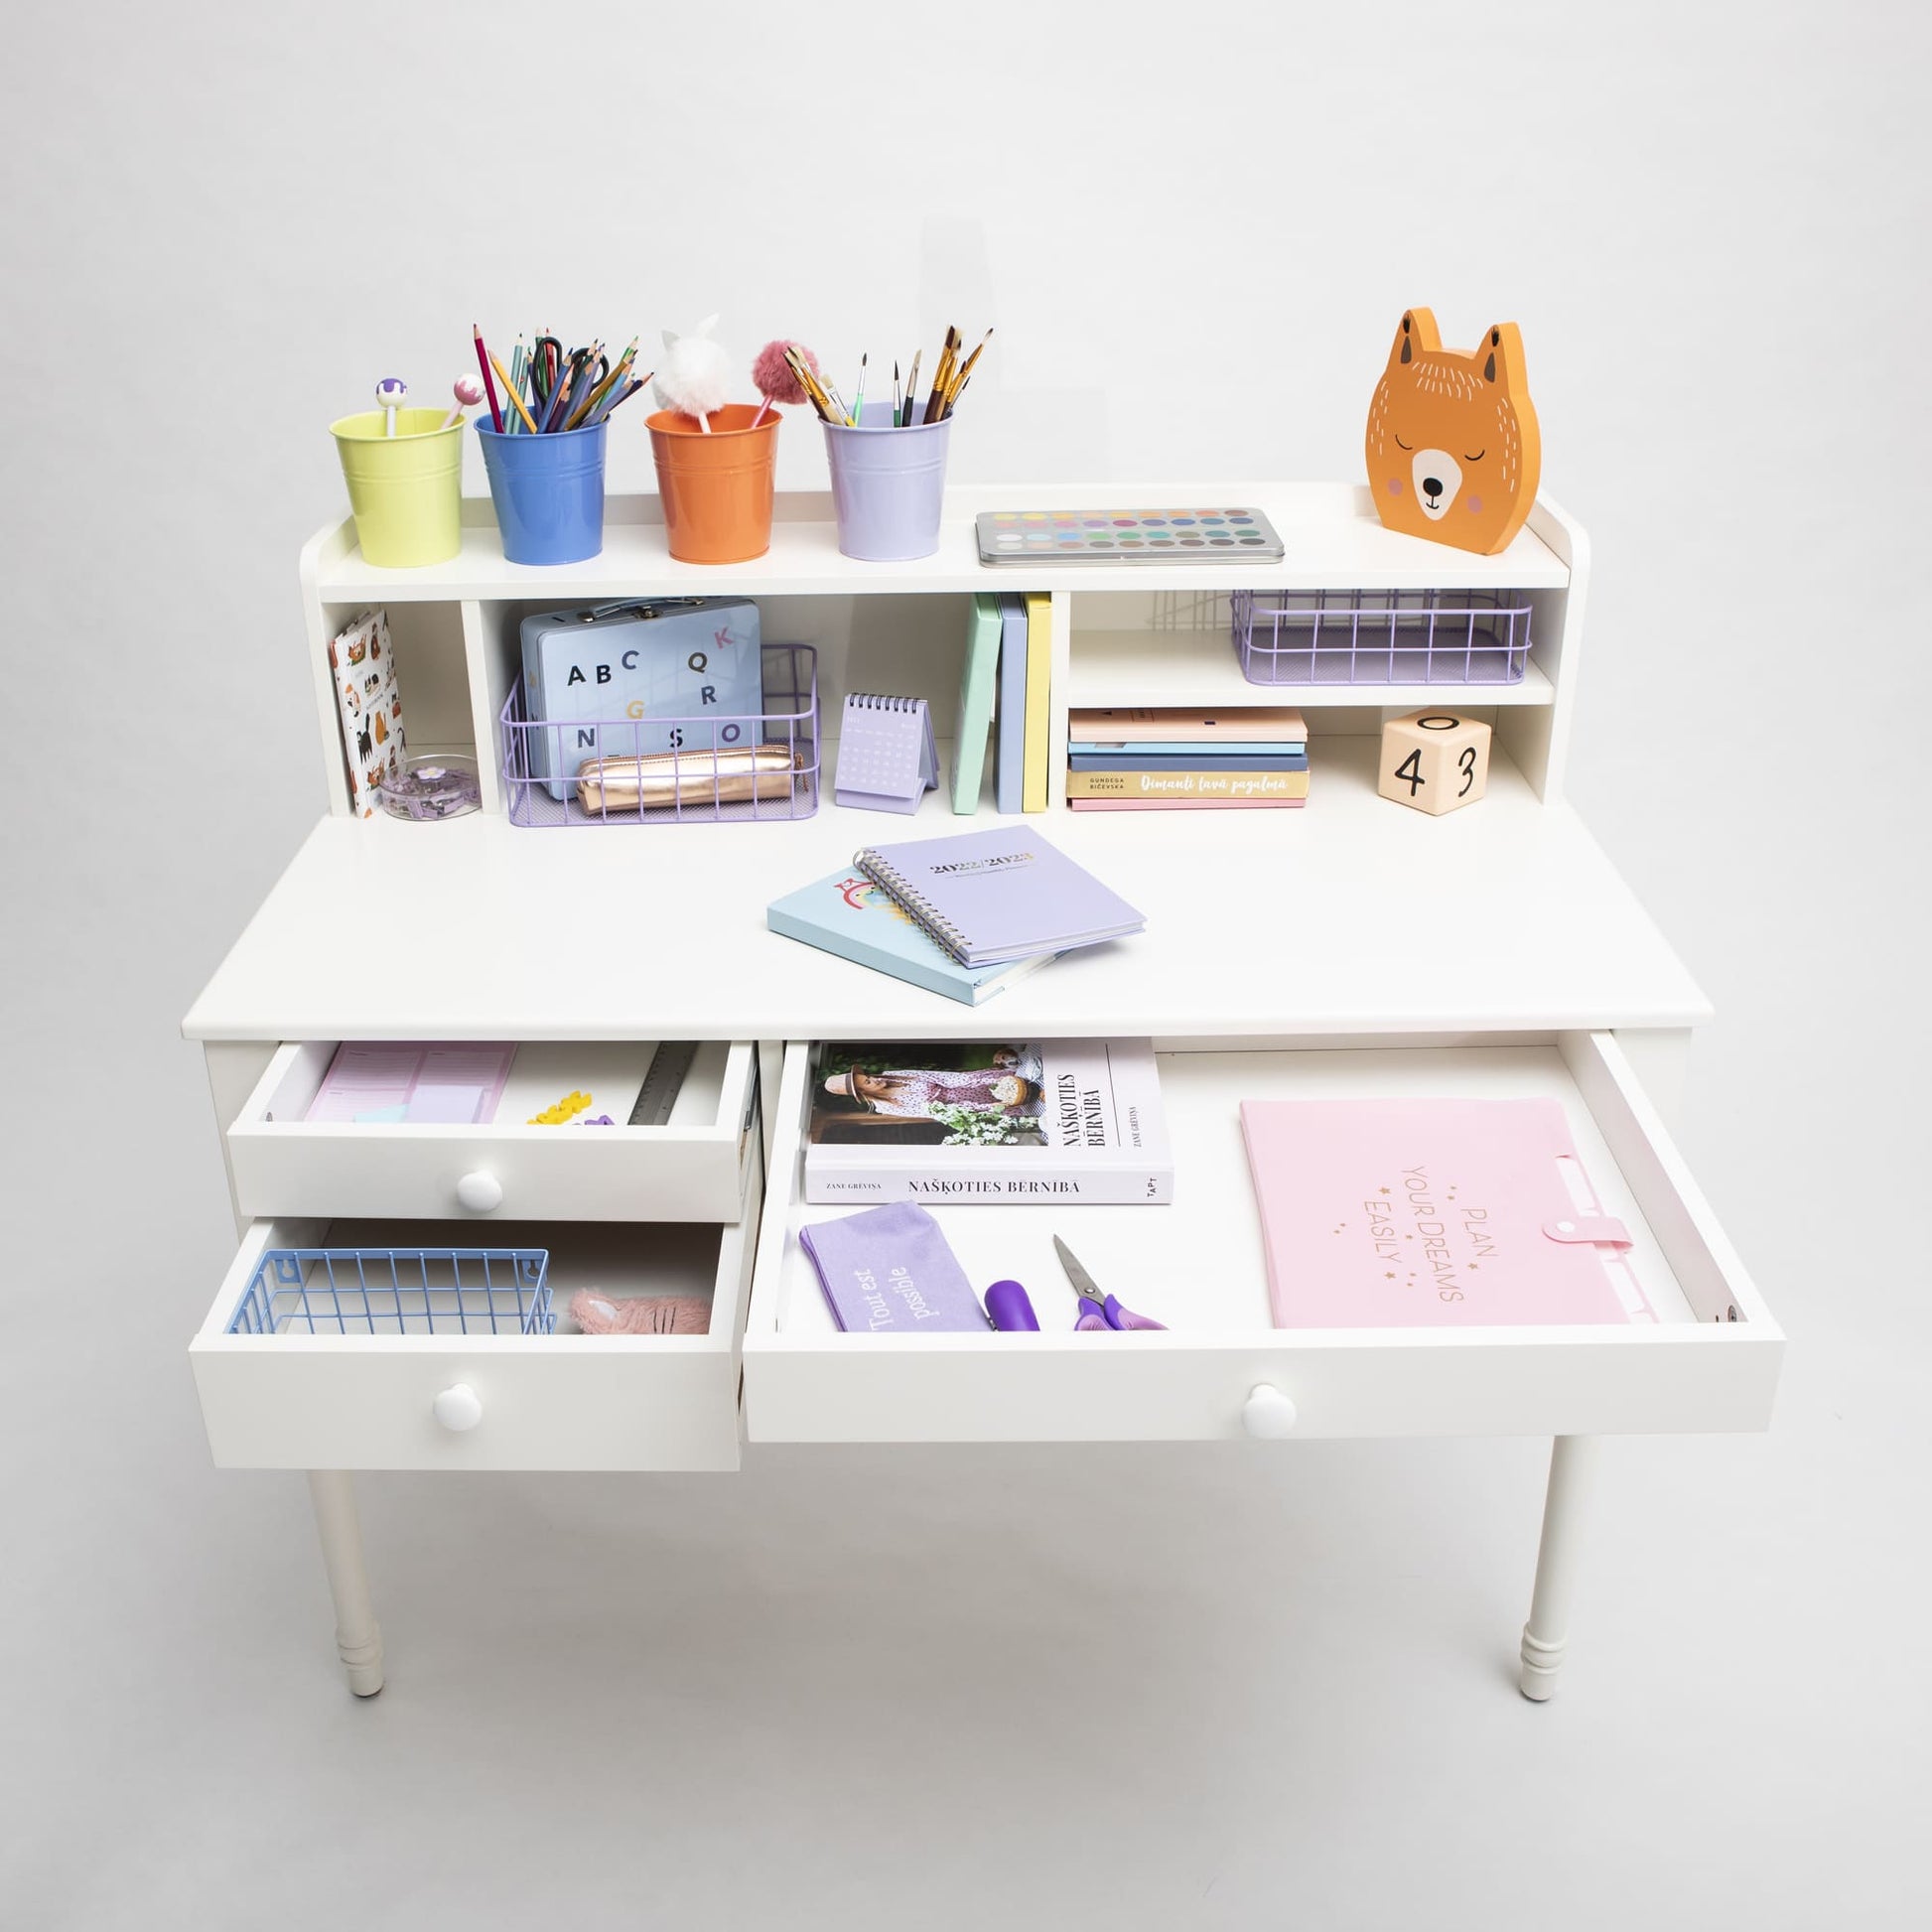 A neat, versatile children's Pedestal desk with open drawers displaying school supplies, books, and colorful stationery against a white background.